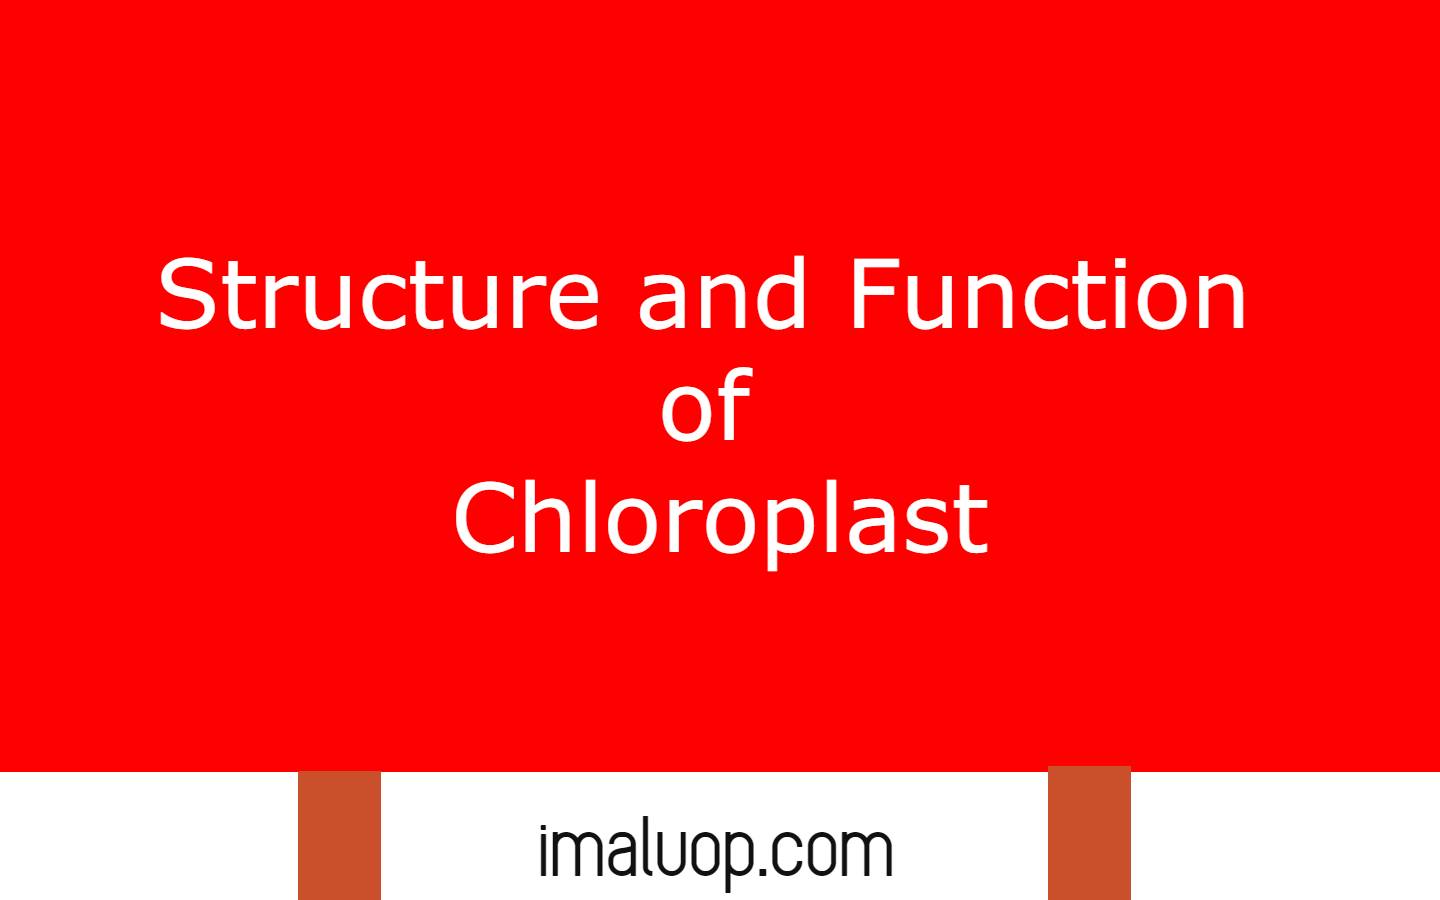 Structure and Function of Chloroplast